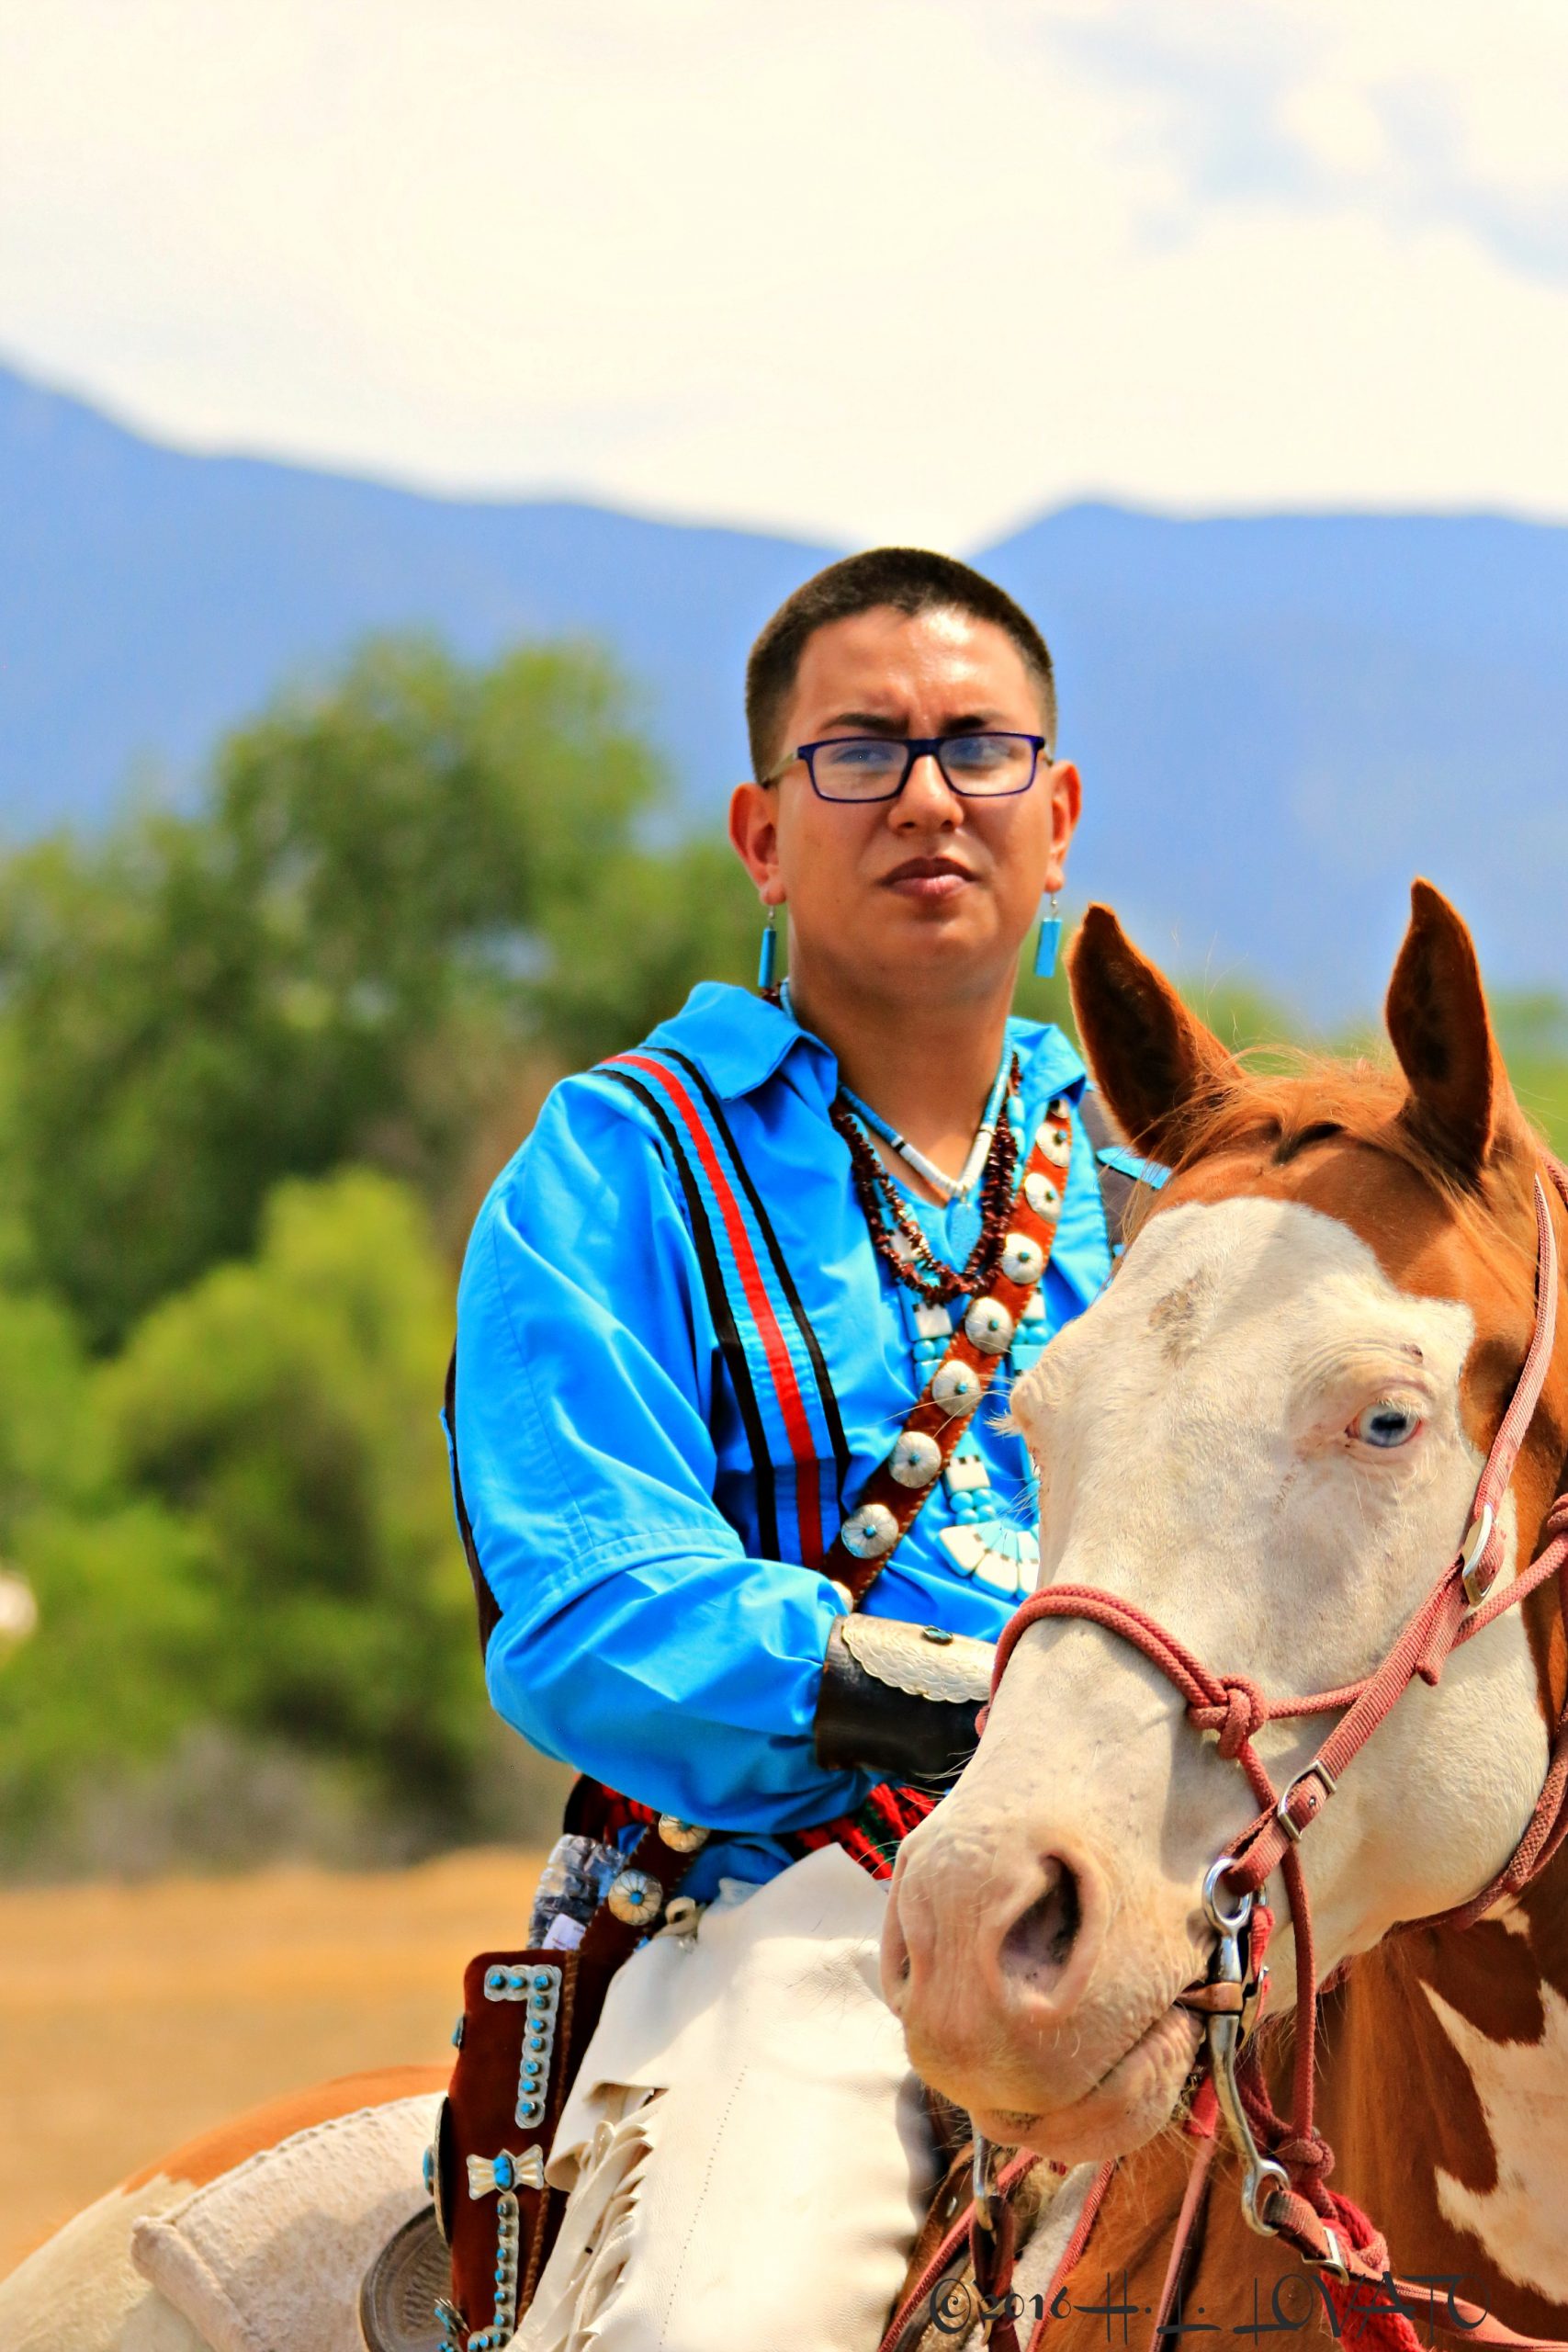 Man on horse dressed in traditional clothing